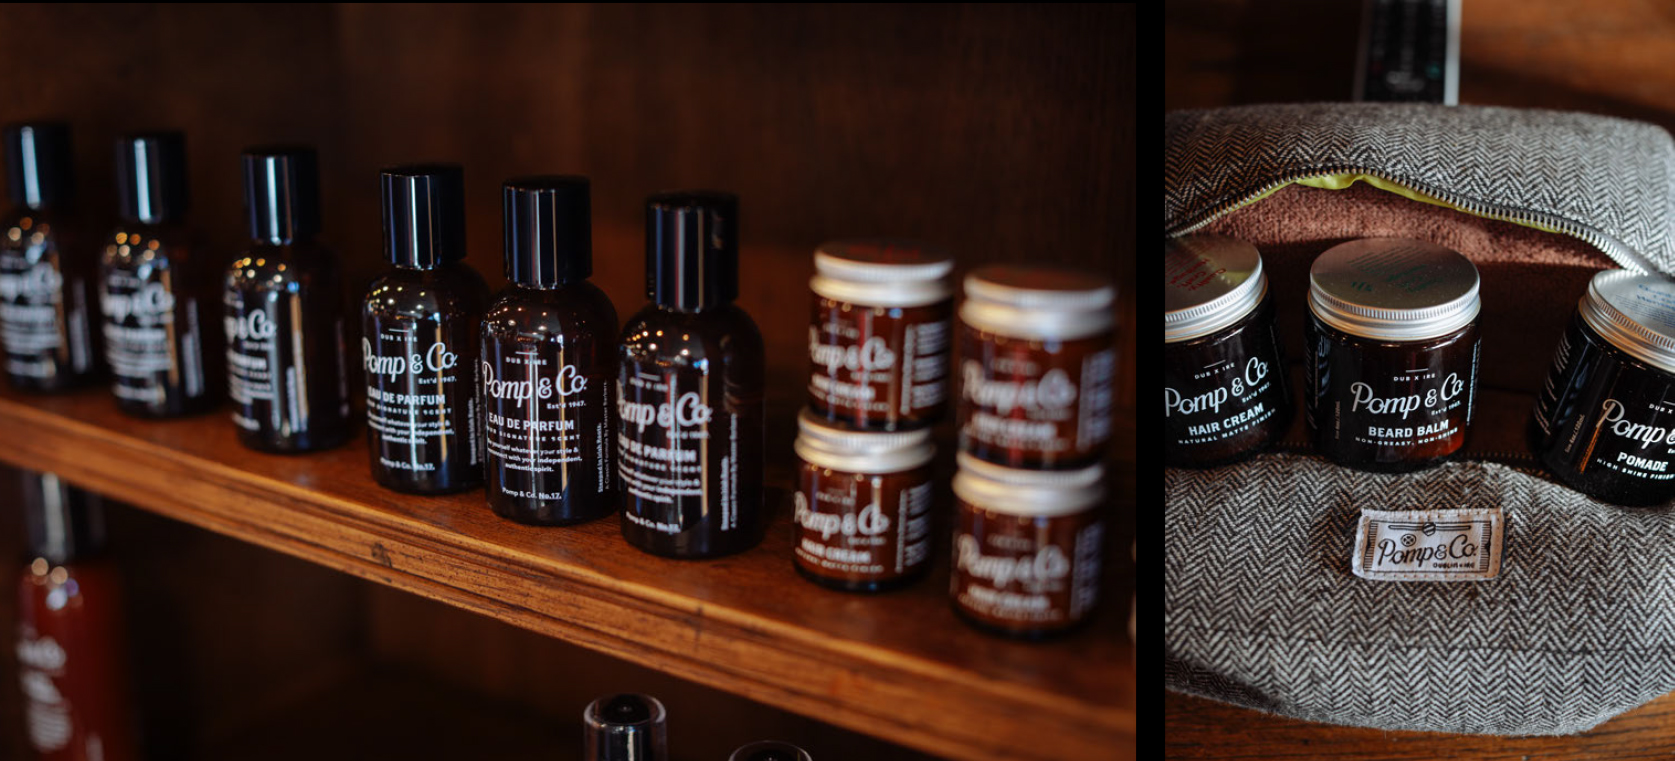 Pomp & Co. Products